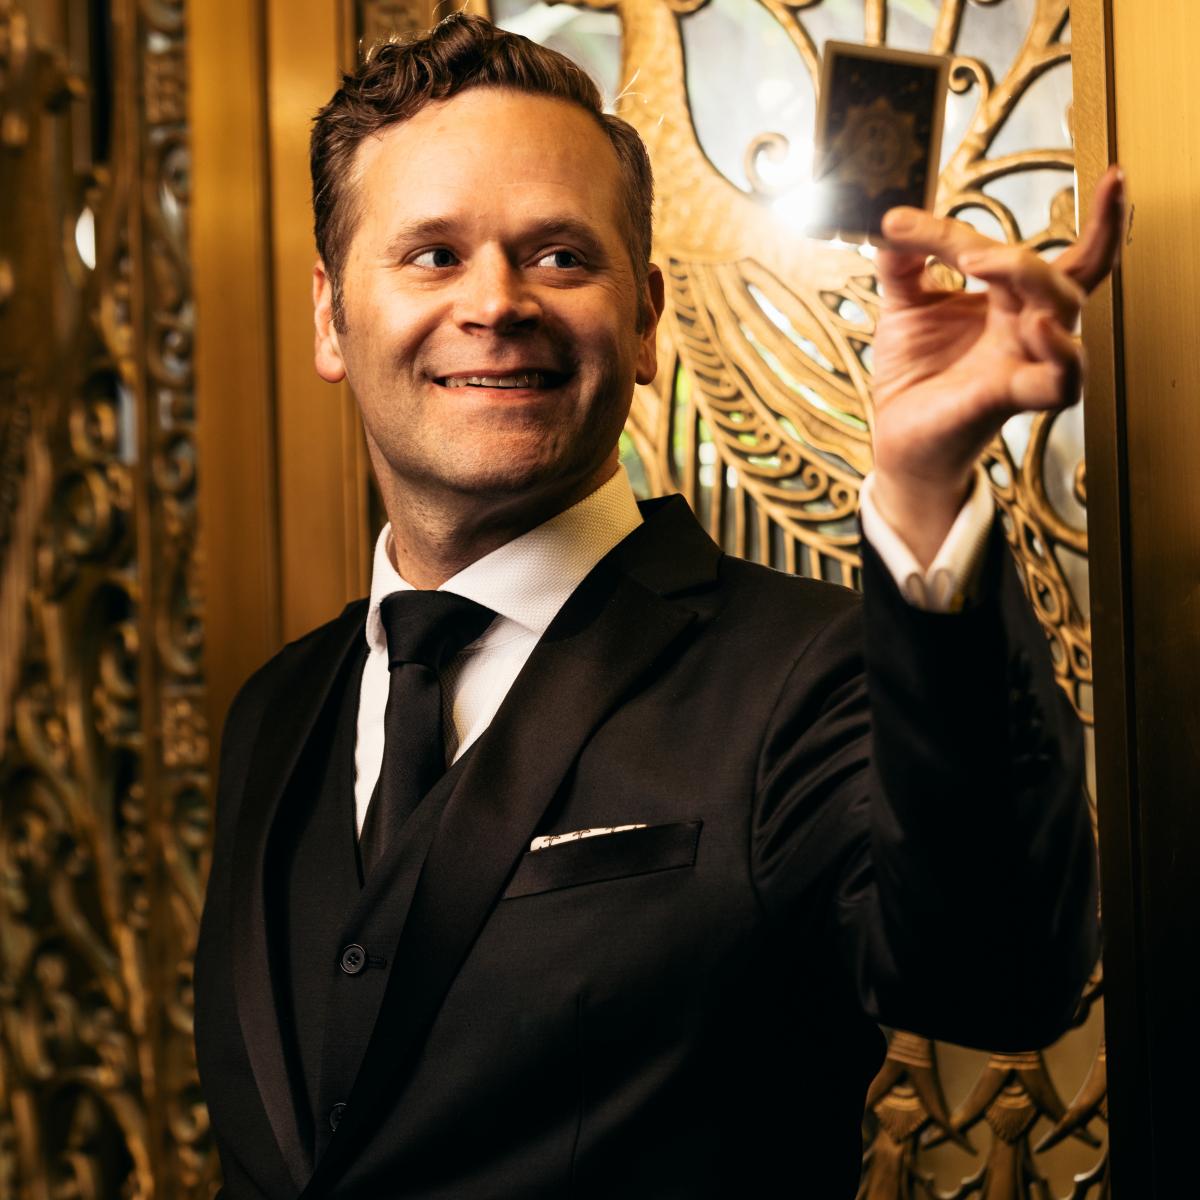 Dennis stands in front of gold doors with a playing card.